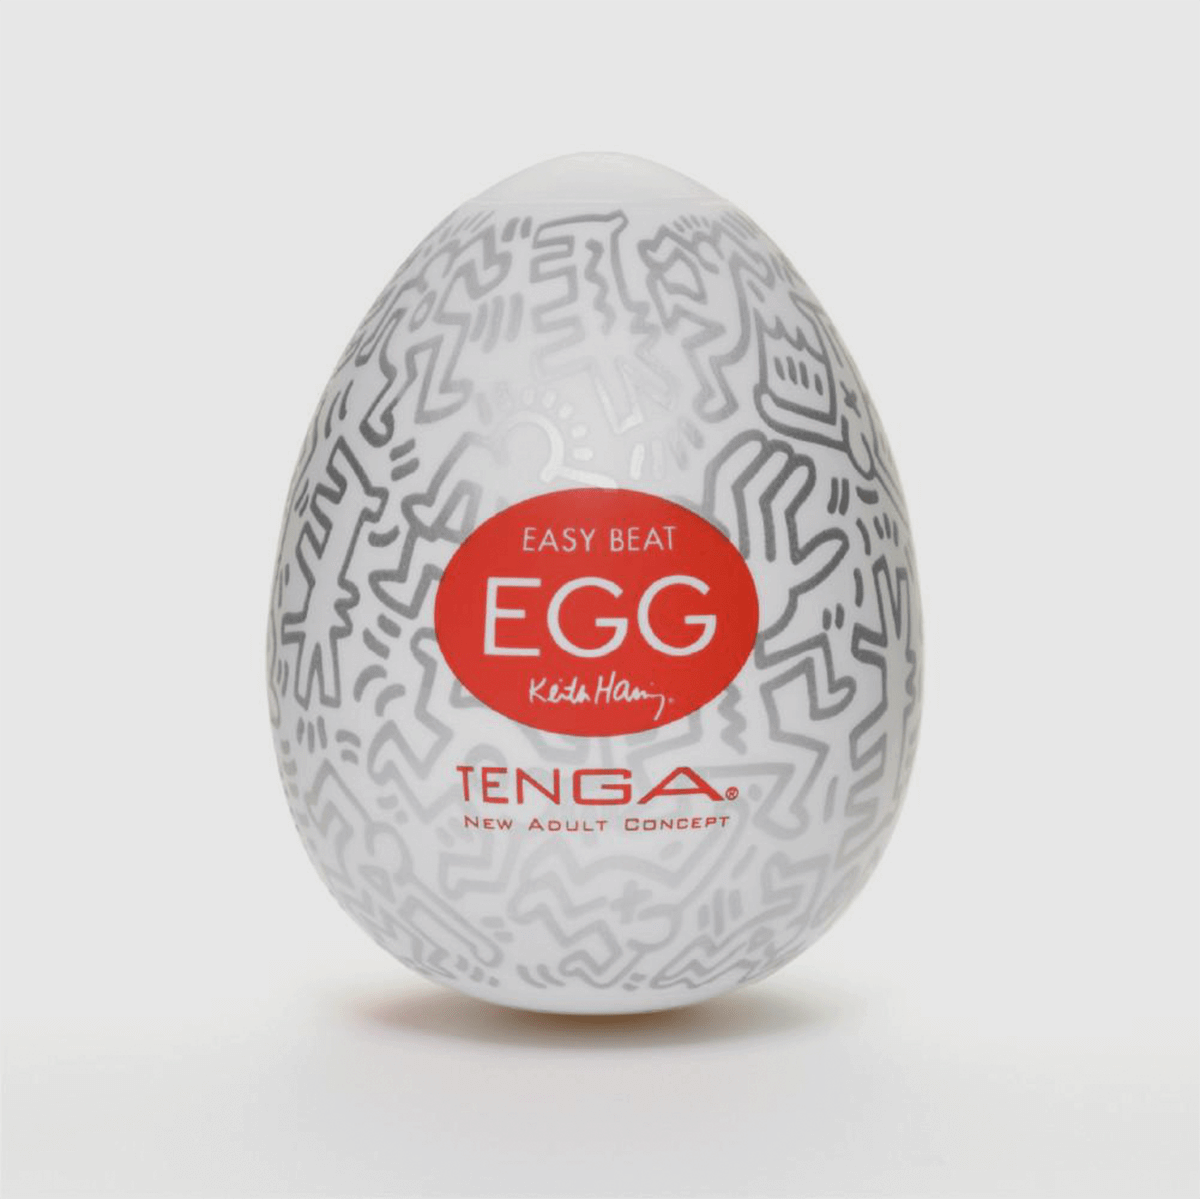 Tenga ✕ Keith Haring Egg Party - Thorn & Feather Sex Toy Canada